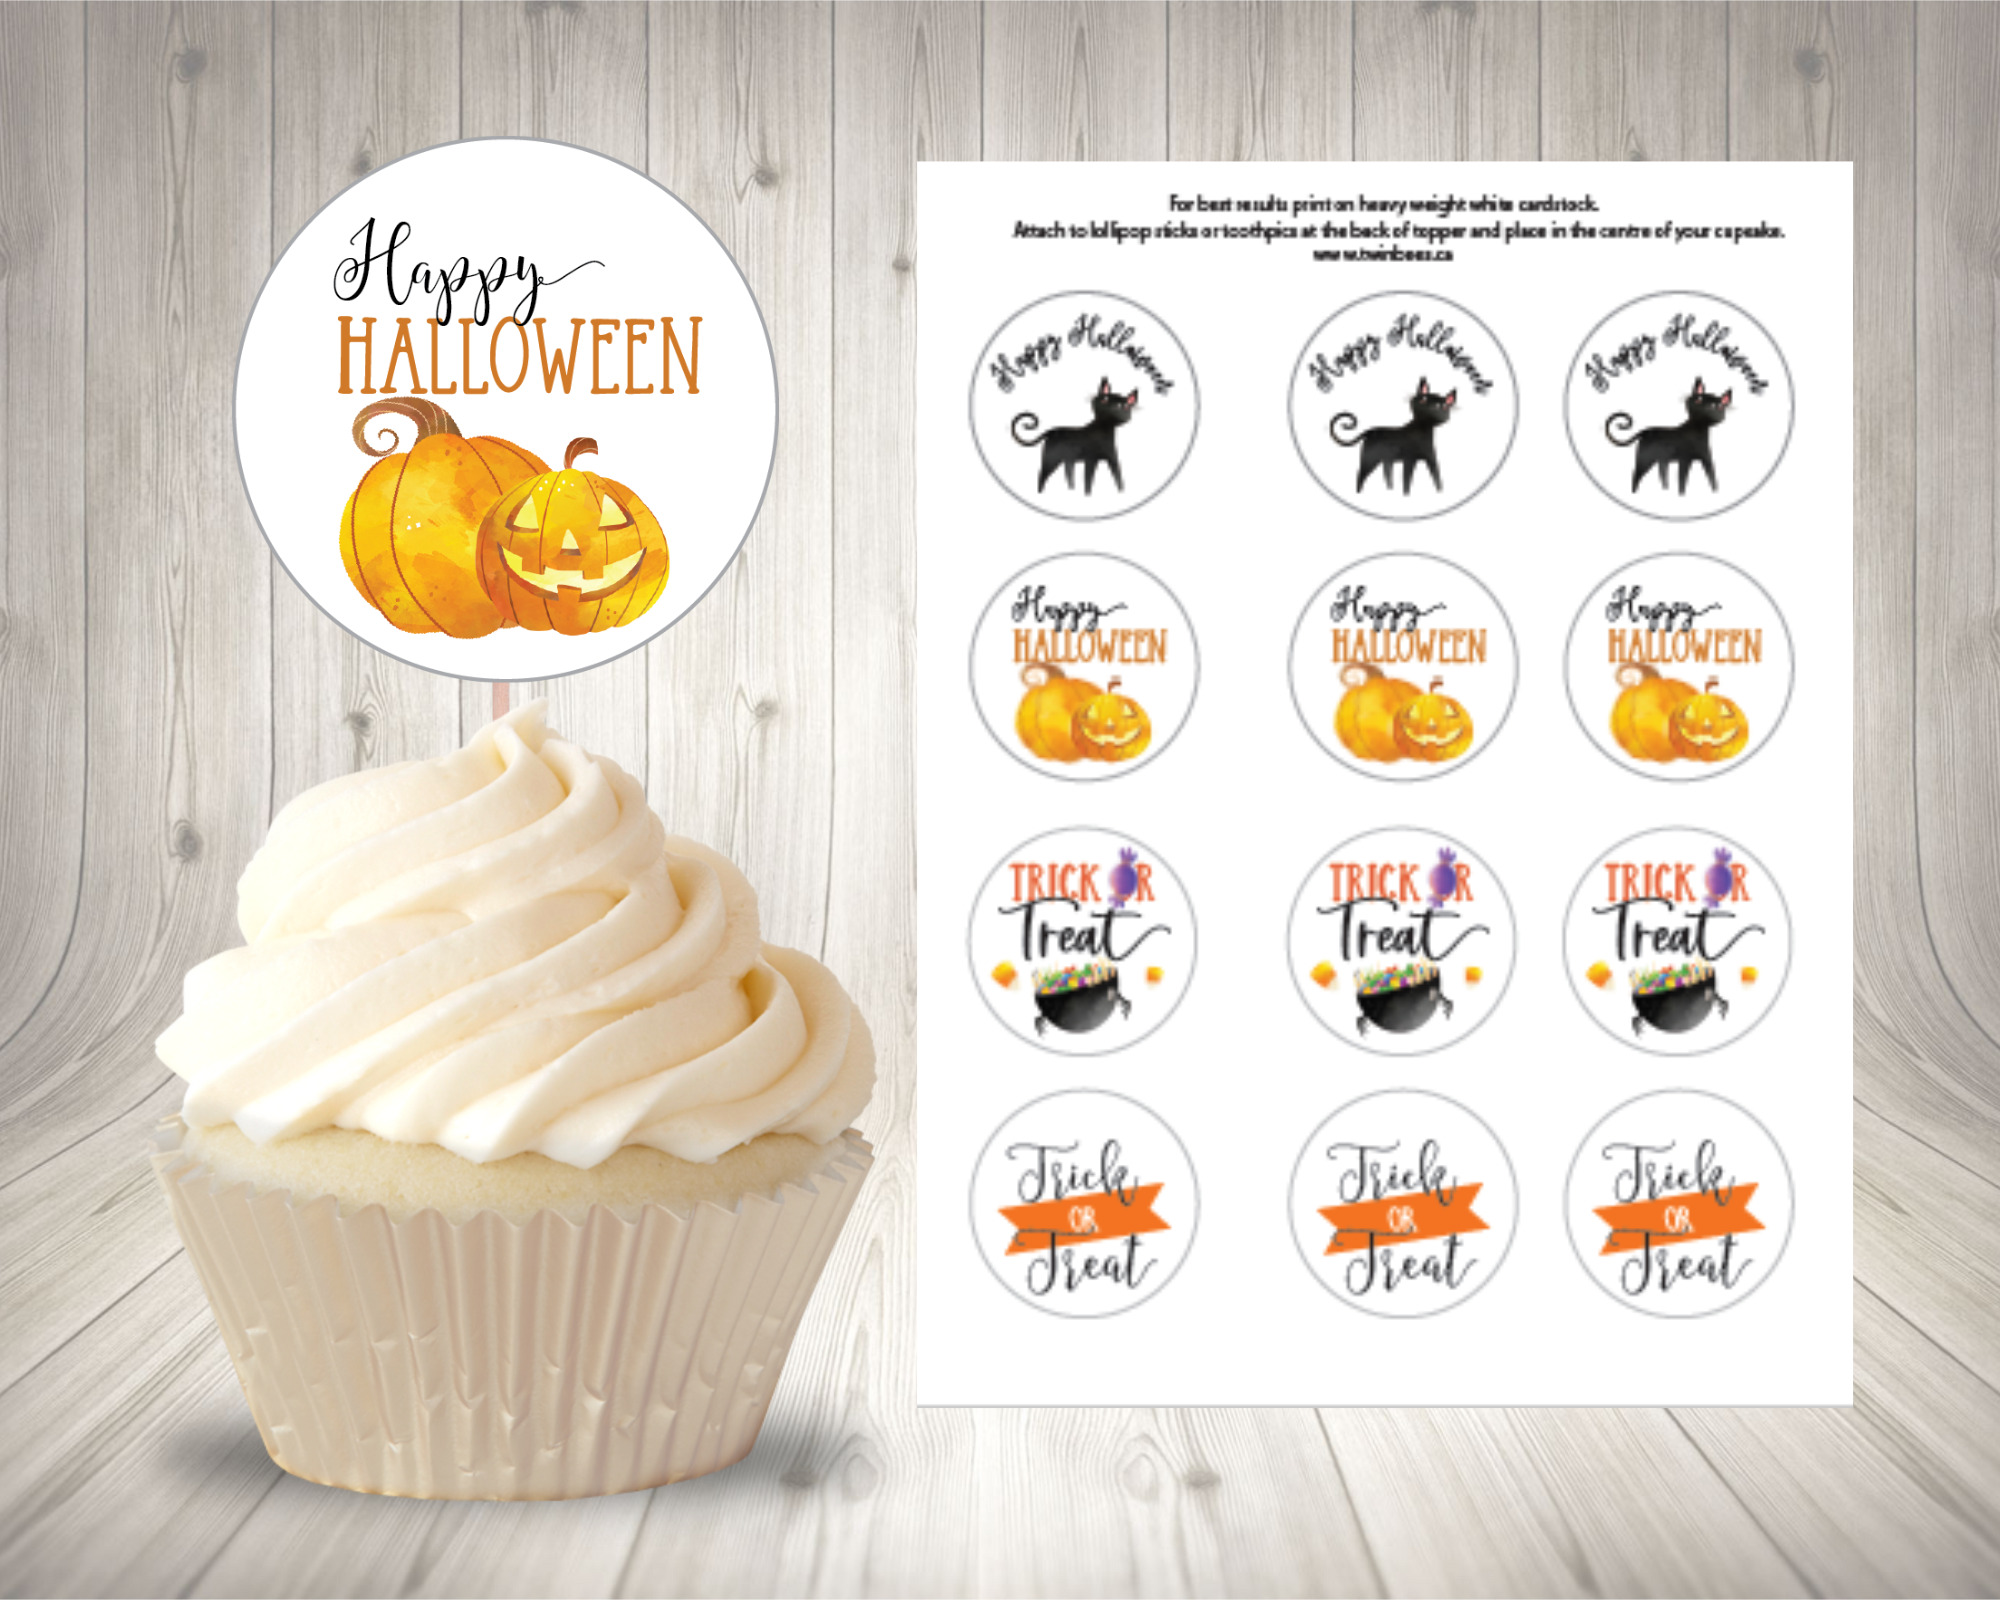 Image showing the 4 Cupcake topper designs